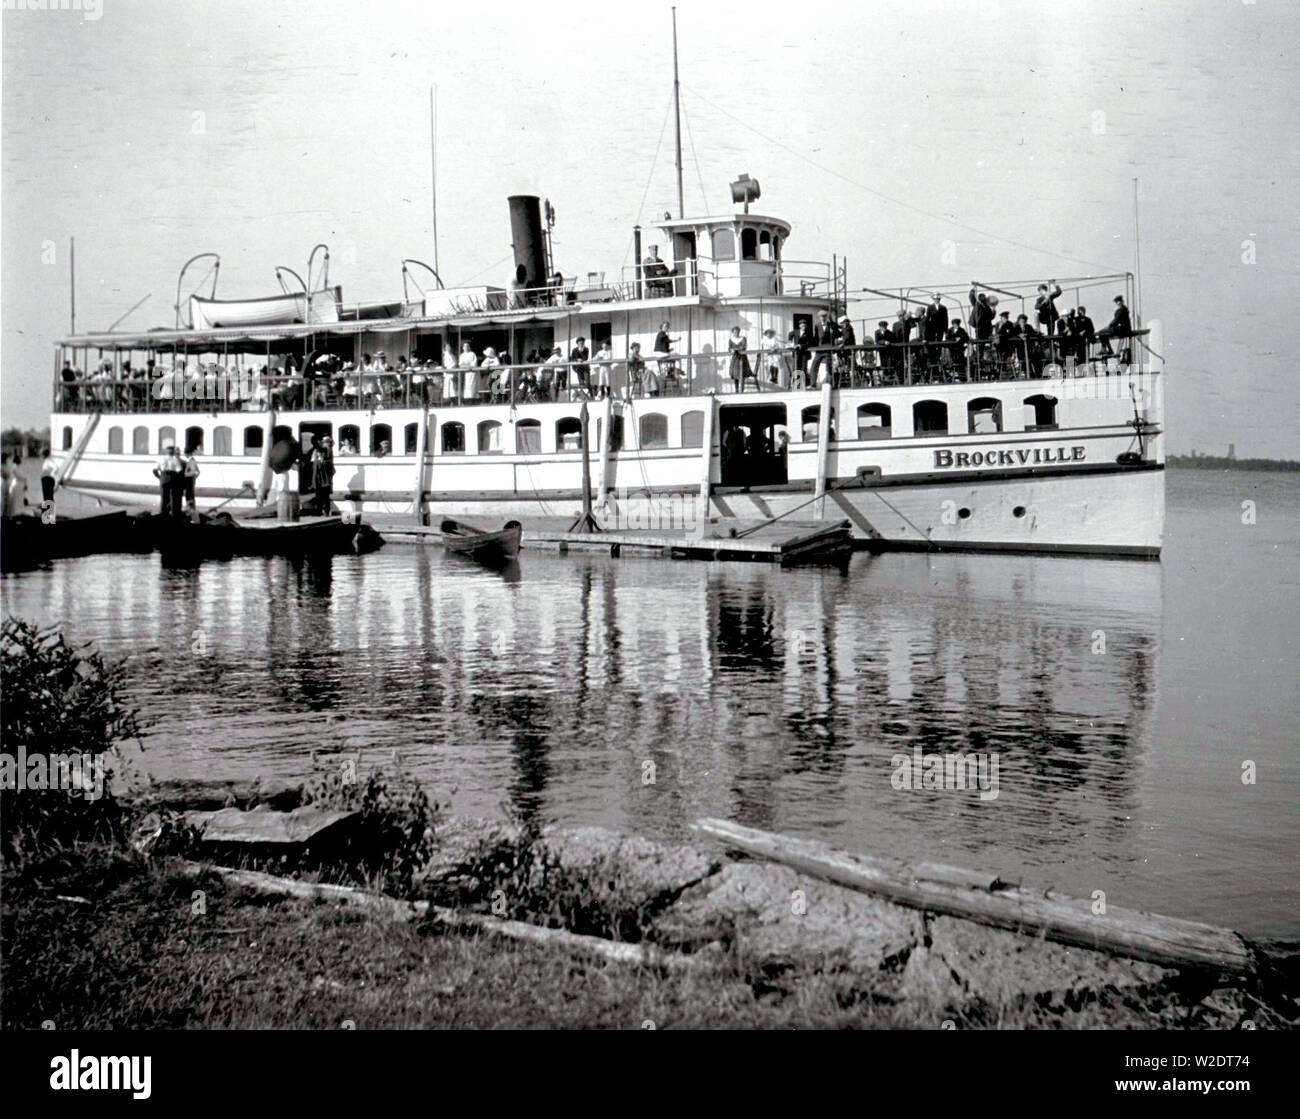 The Brockville, with many people on board. This photograph was taken on 9 July 1908, possibly at Massassauga Point, Prince Edward County, Ontario Stock Photo